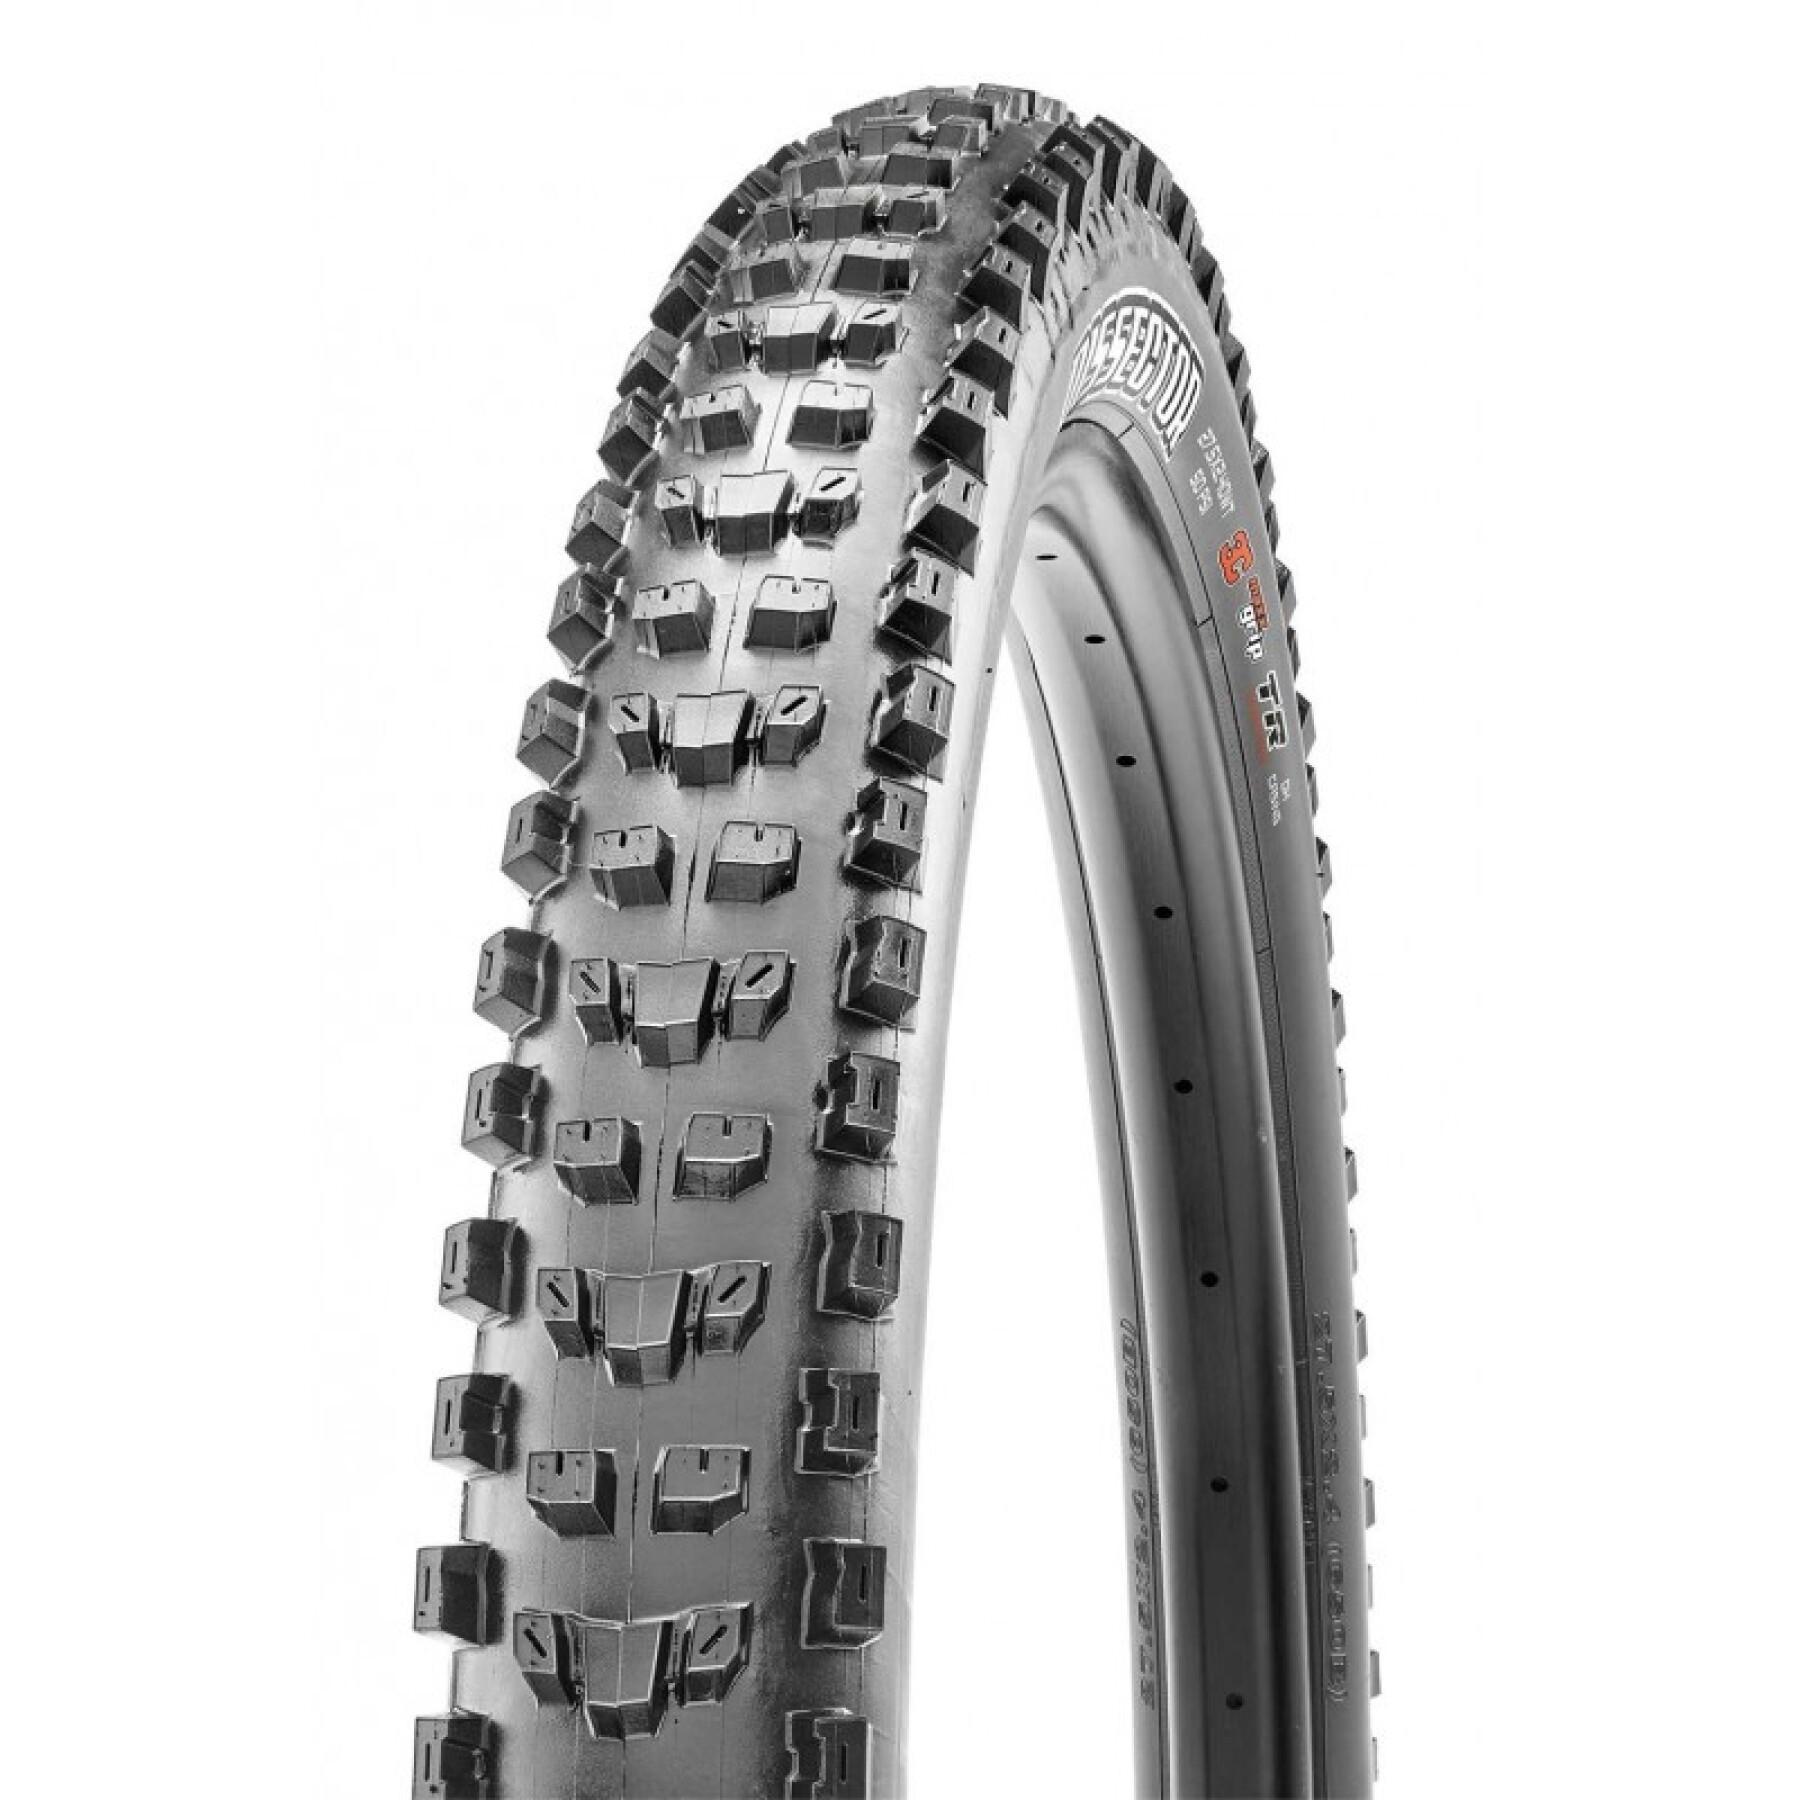 Soft tire Maxxis Dissector (Wide Trail) Exo / Tubeless Ready